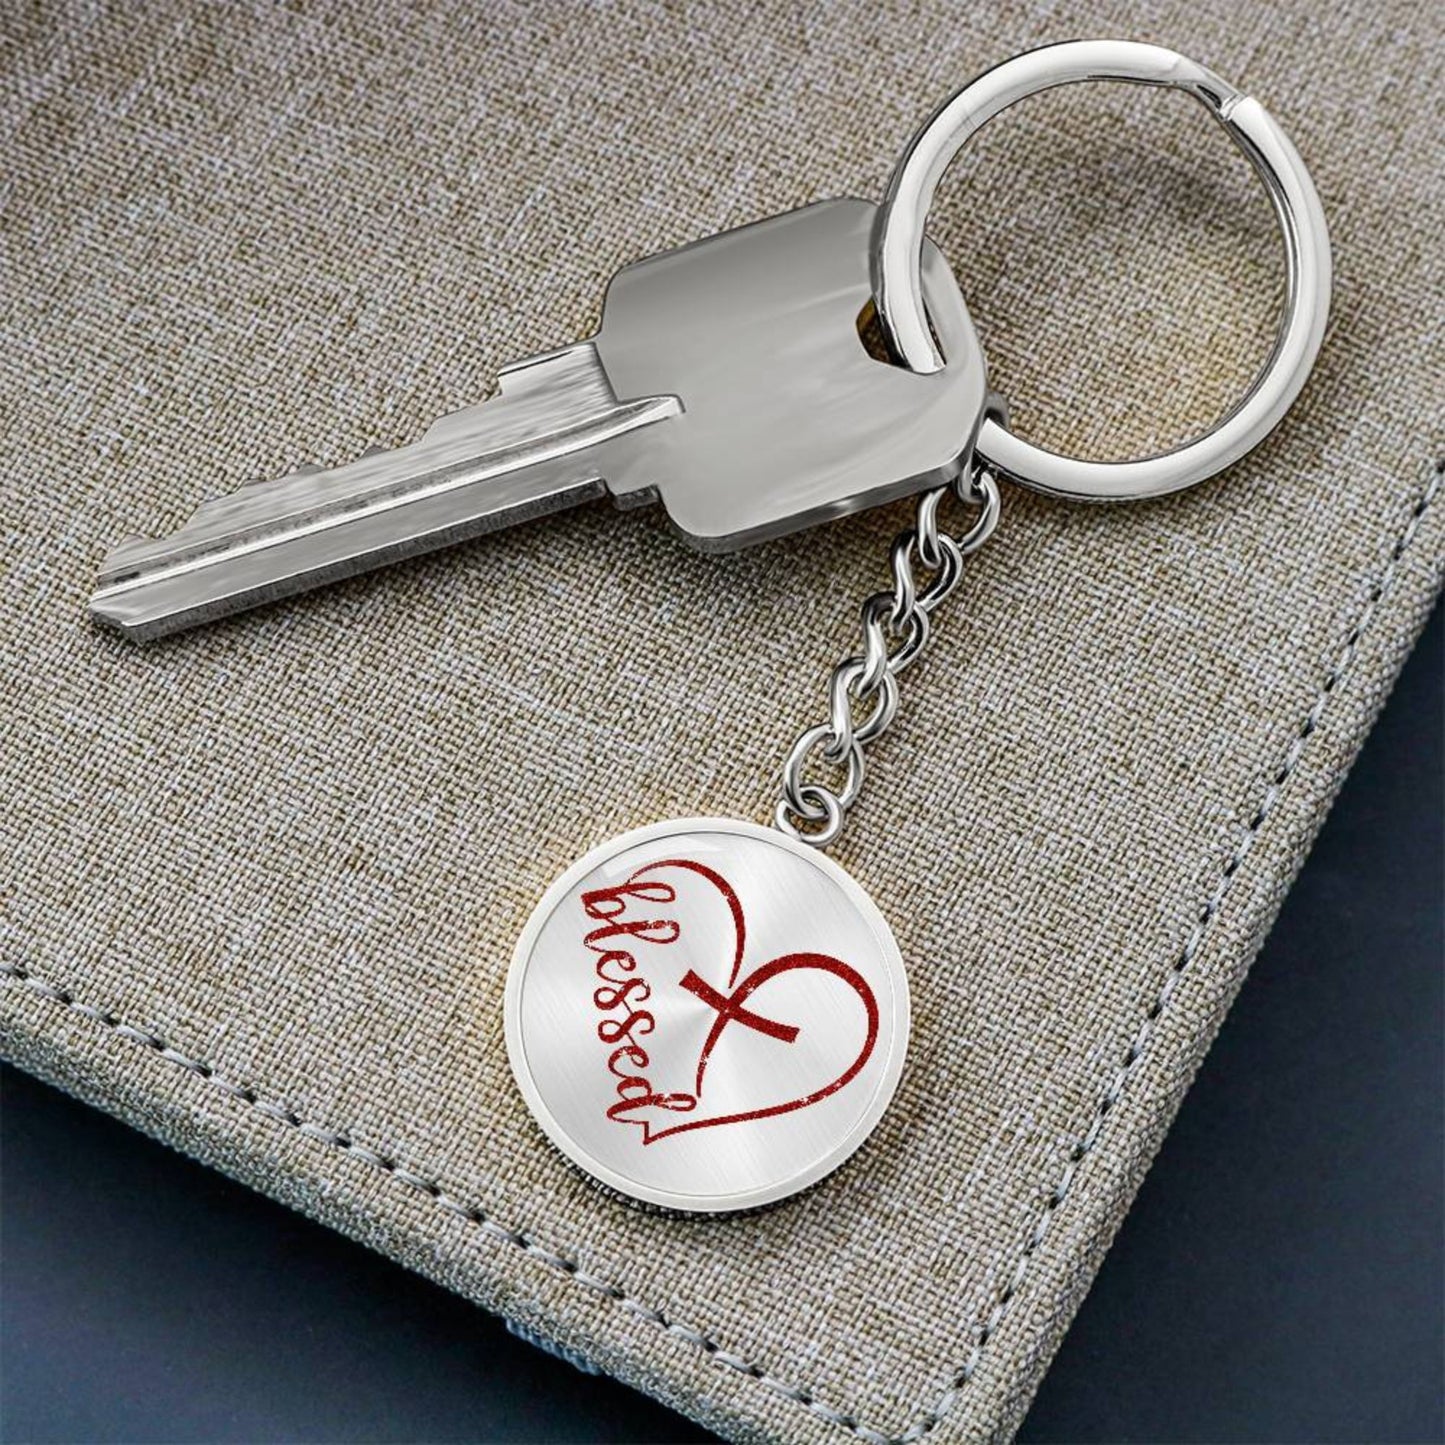 Blessed Heart with Embedded Cross - Red Glitter Circle Keychain Engraving: No Jesus Passion Apparel